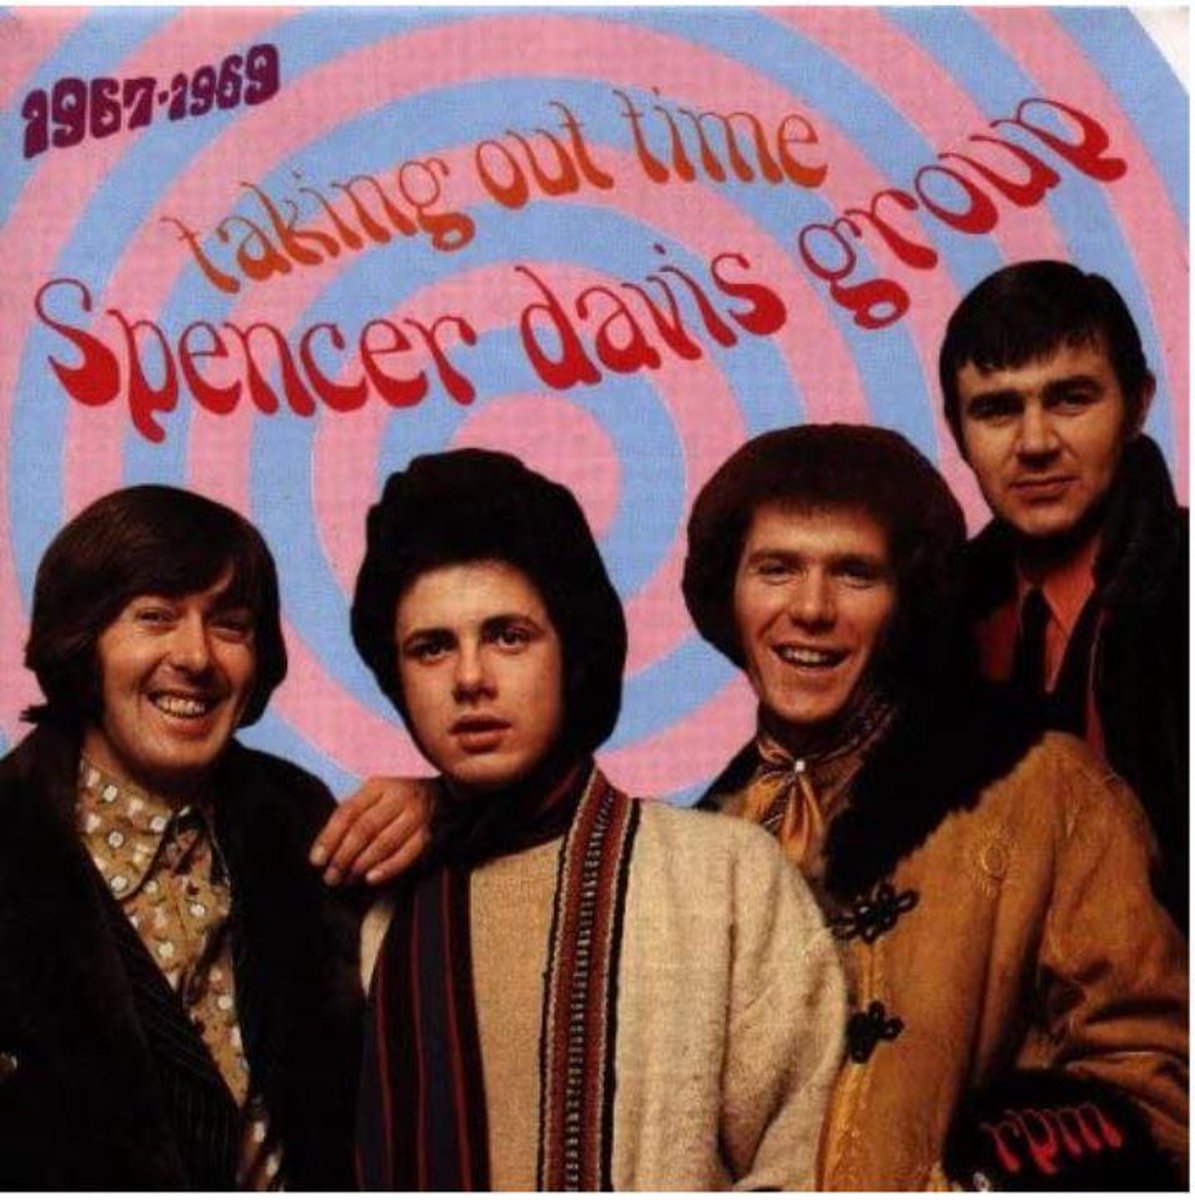 Taking Out Time 1967-1969 - The Spencer Davis Group